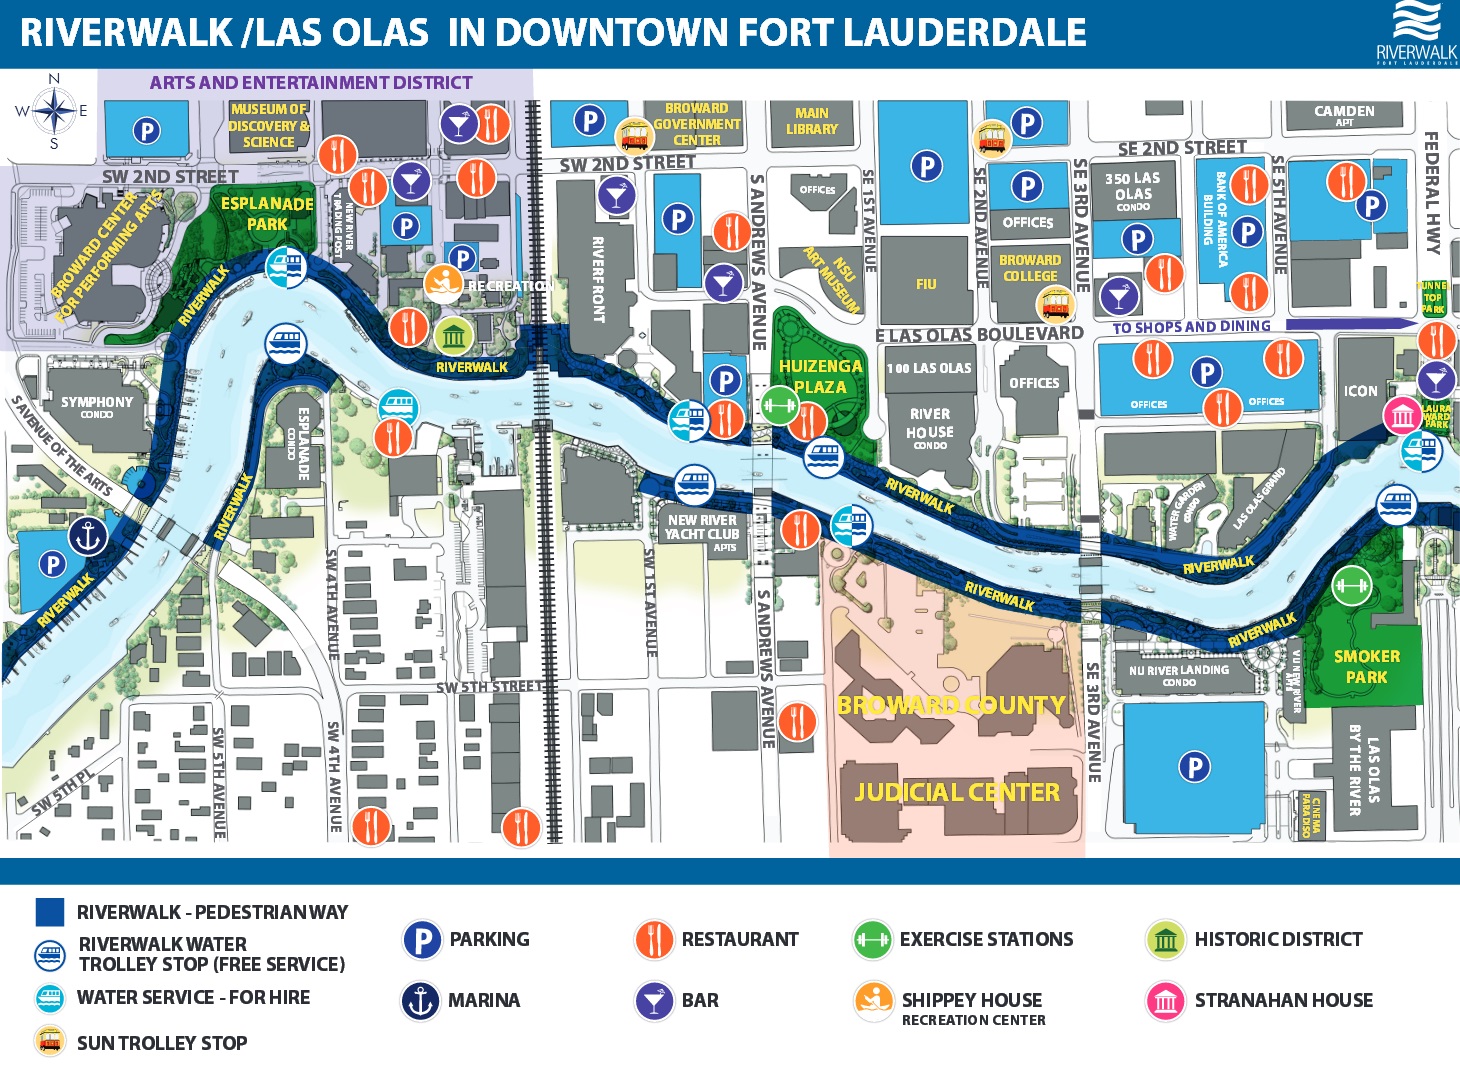 Broward College Downtown Campus Map Riverwalk Fort Lauderdale – INFORMATION ◇ EVENTS ◇ ADVOCACY